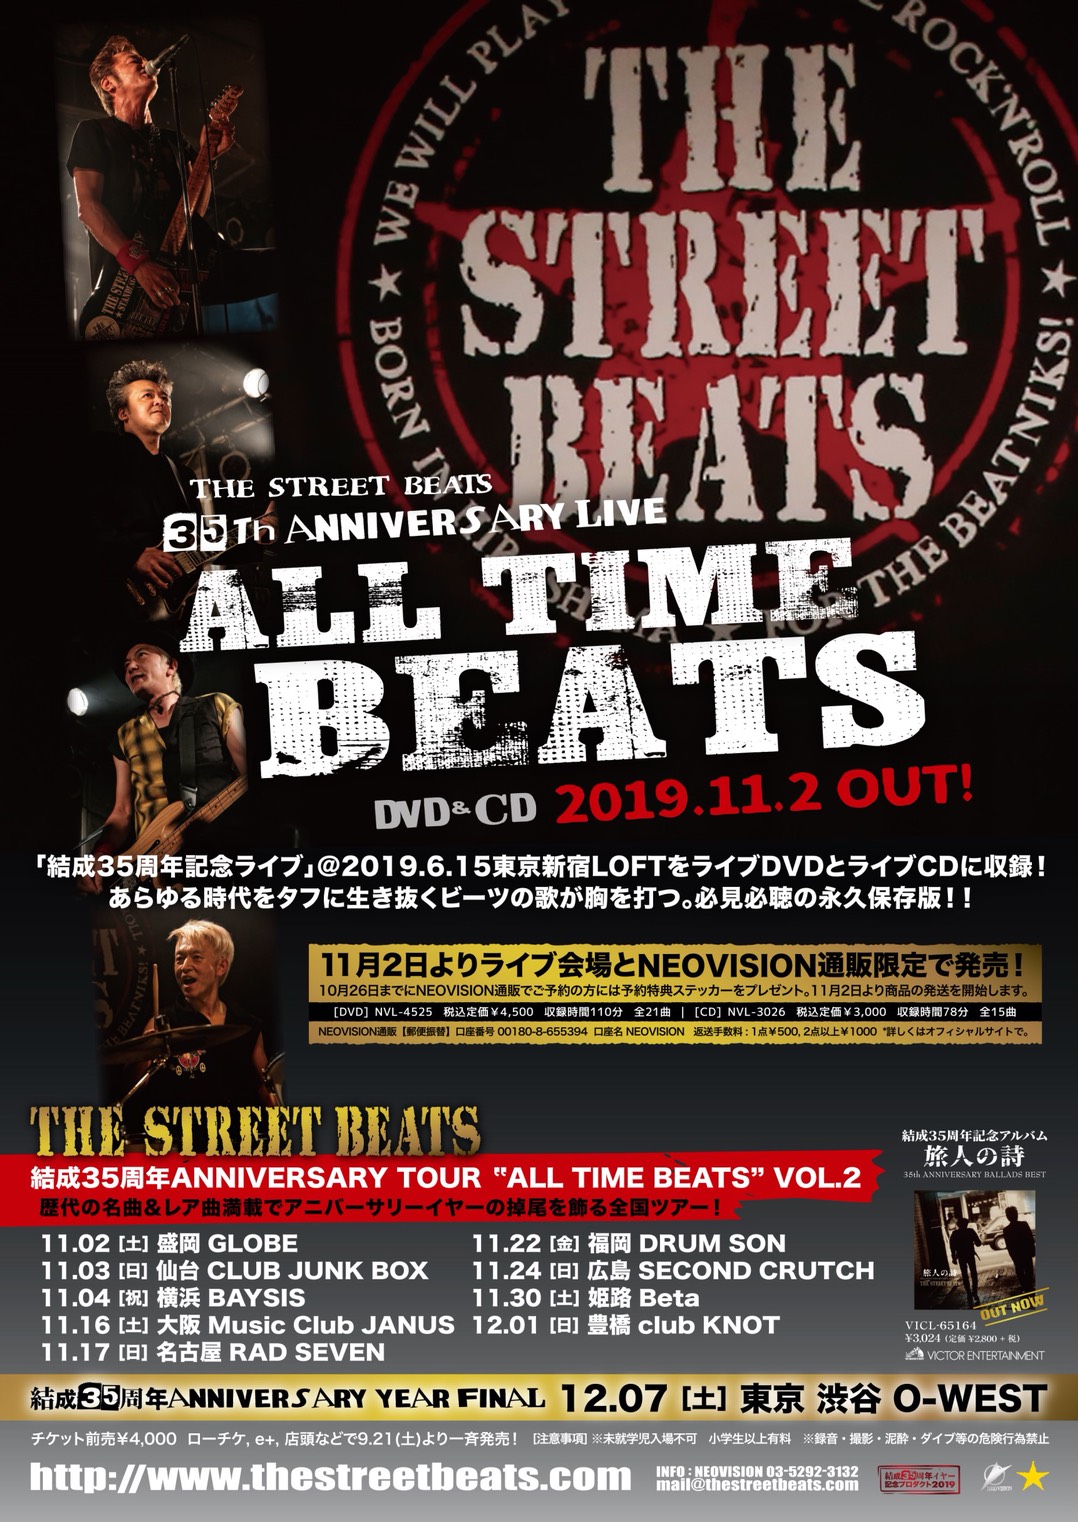 THE STREET BEATS 結成35周年 ANNIVERSARY TOUR “ALL TIME BEATS VOL.2”